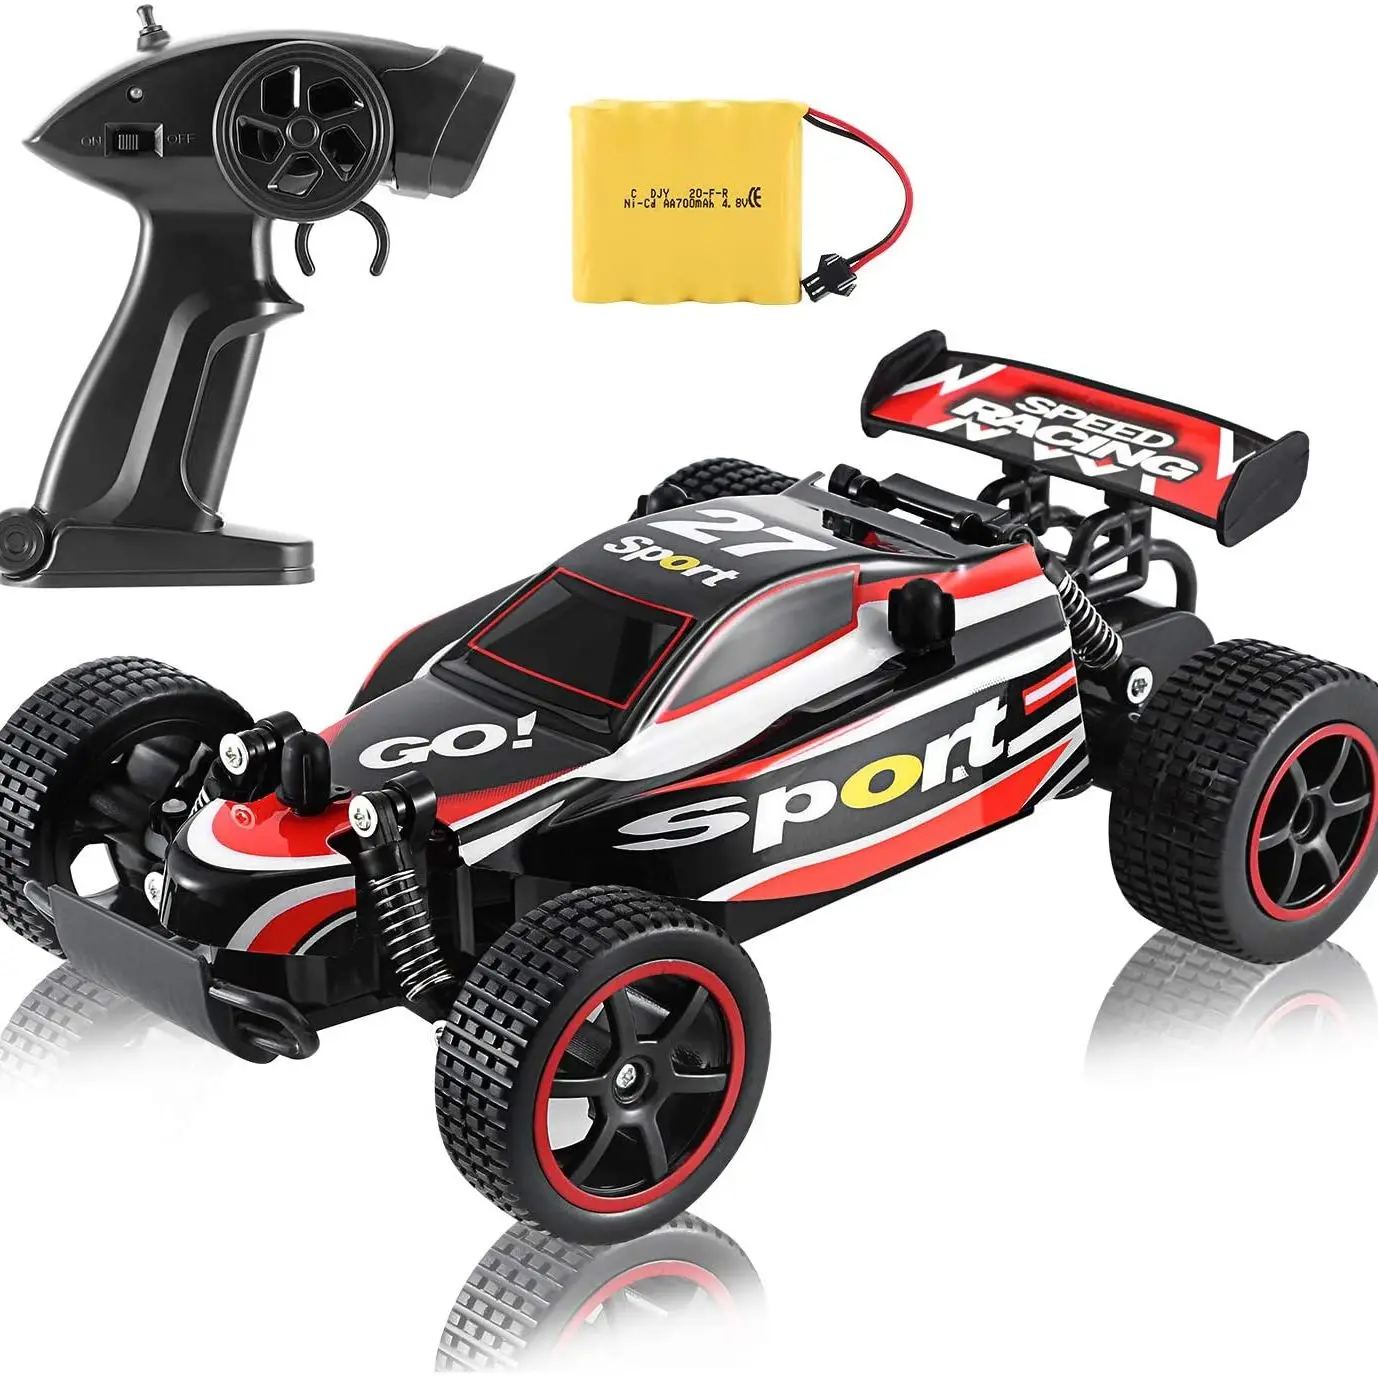 

2021 New RC Car 2.4G 20km/h High Speed Car Radio Controled Machine 1:18 Remote Control Car Toys For Children Kids Gifts RC Drift